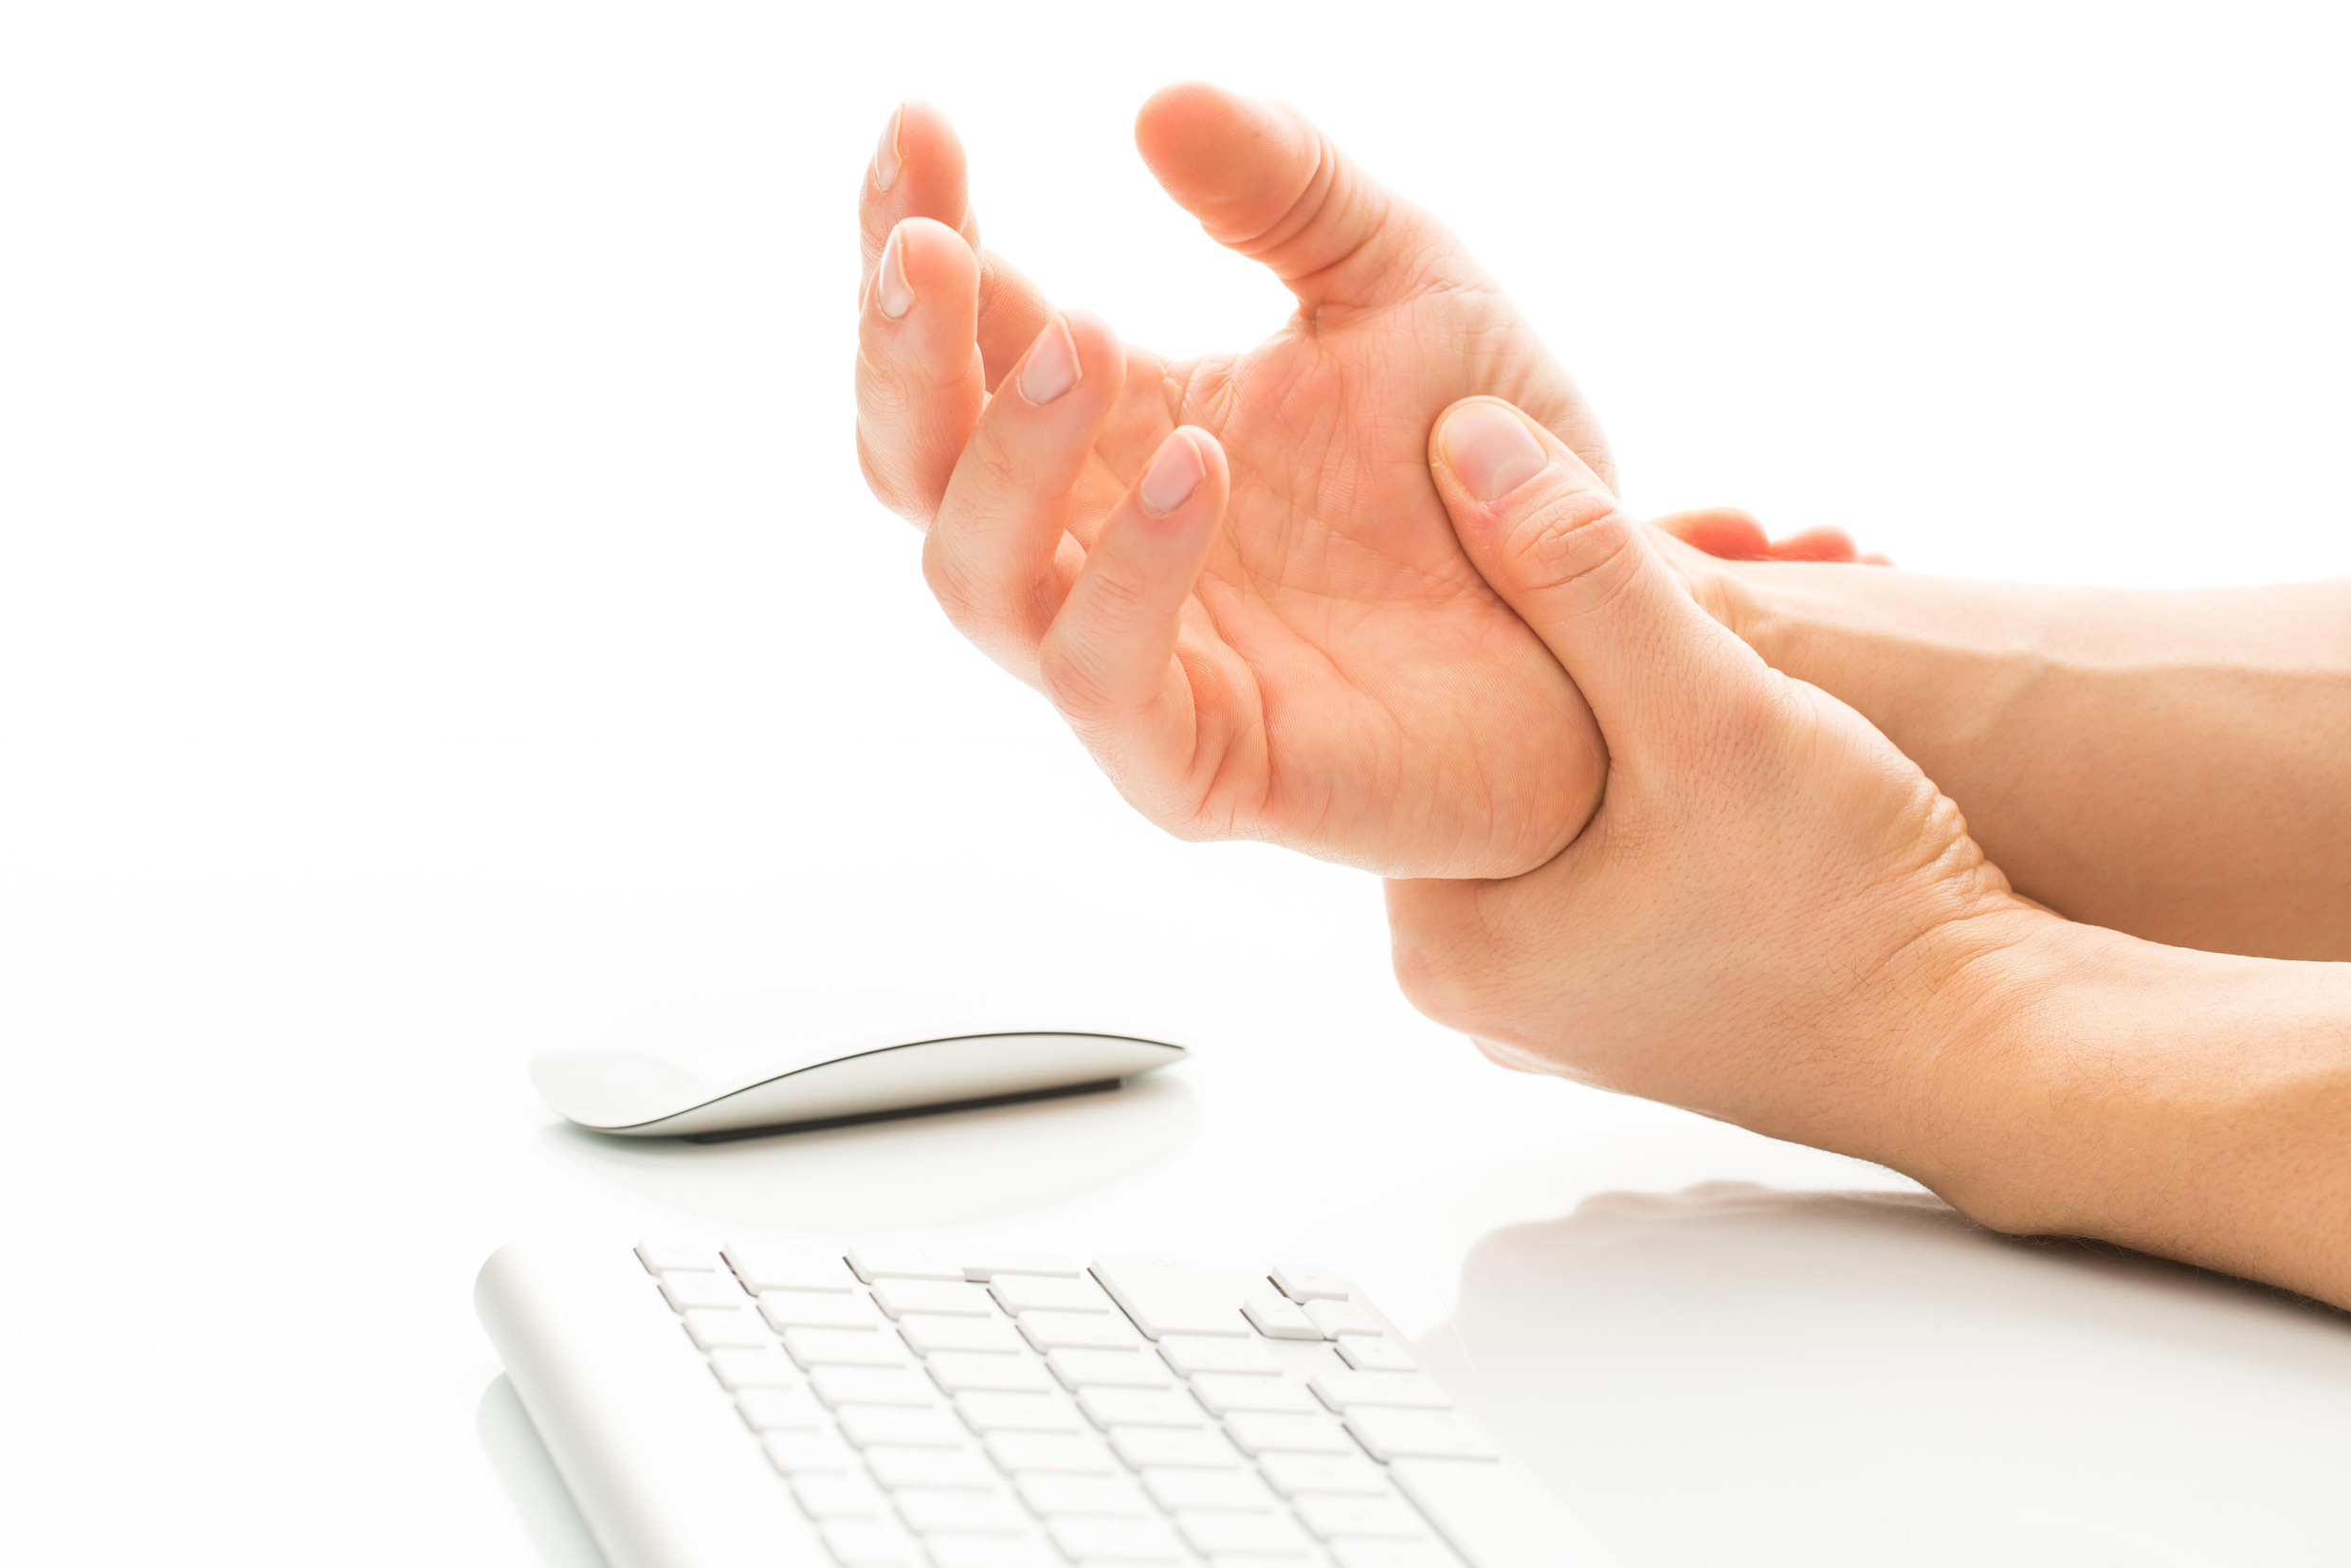 Young man holding his wrist in pain due to prolonged use of keyboard and mouse